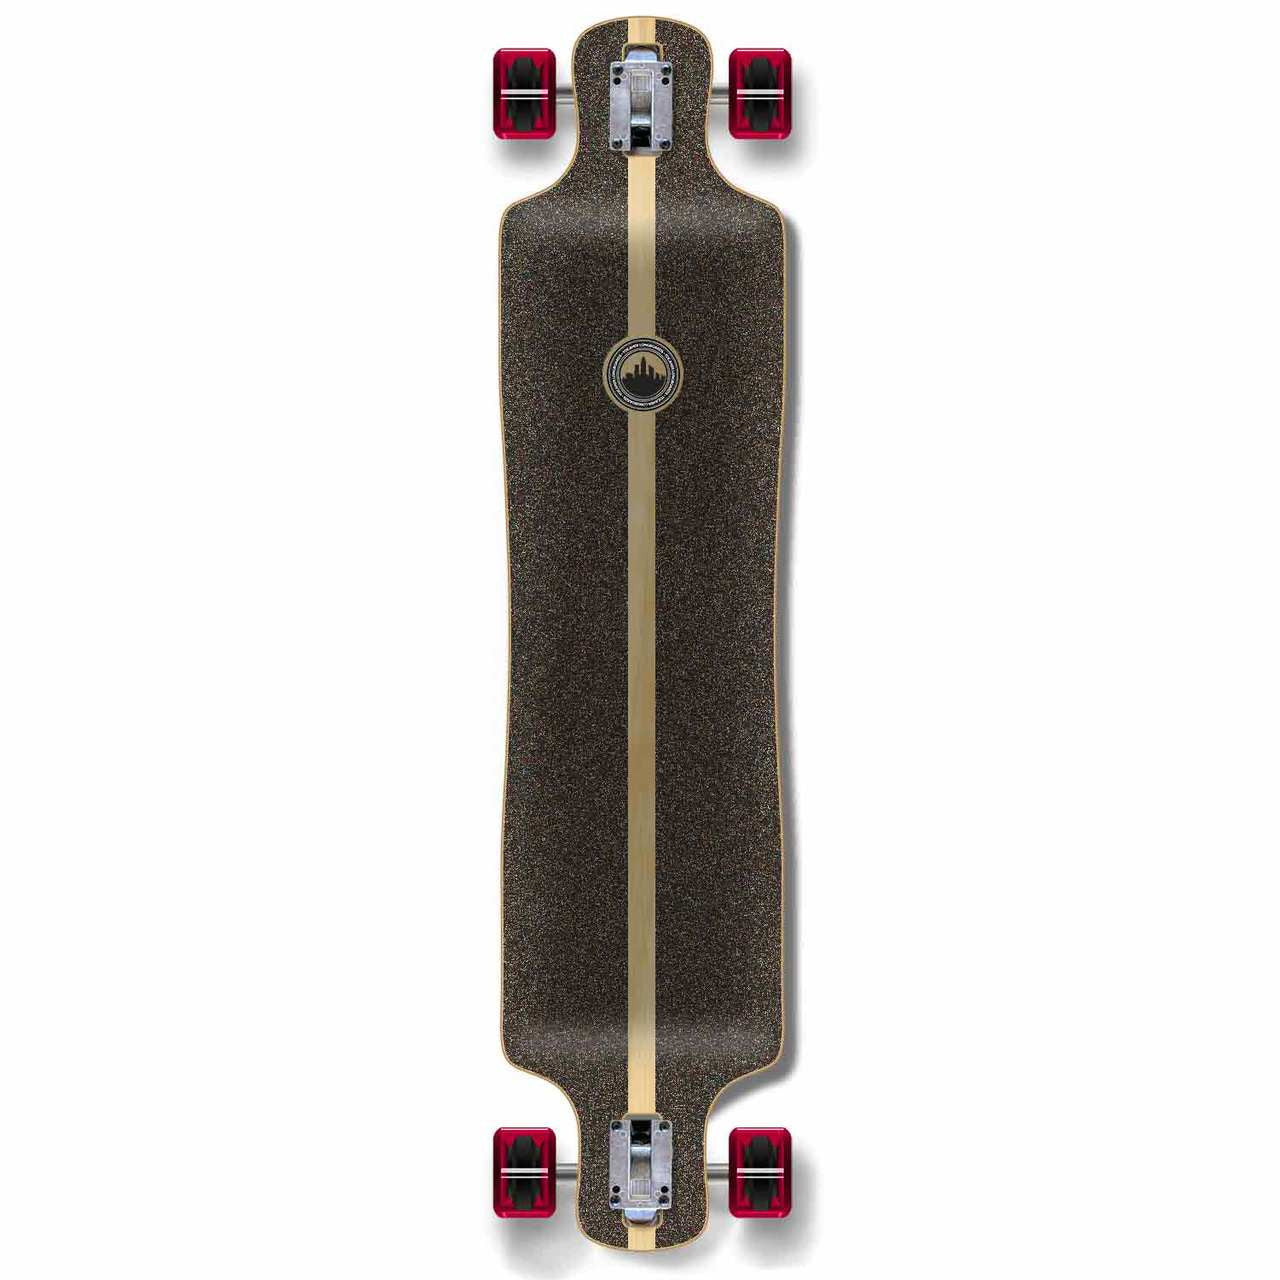 Yocaher Lowrider Longboard Complete - Checker Red